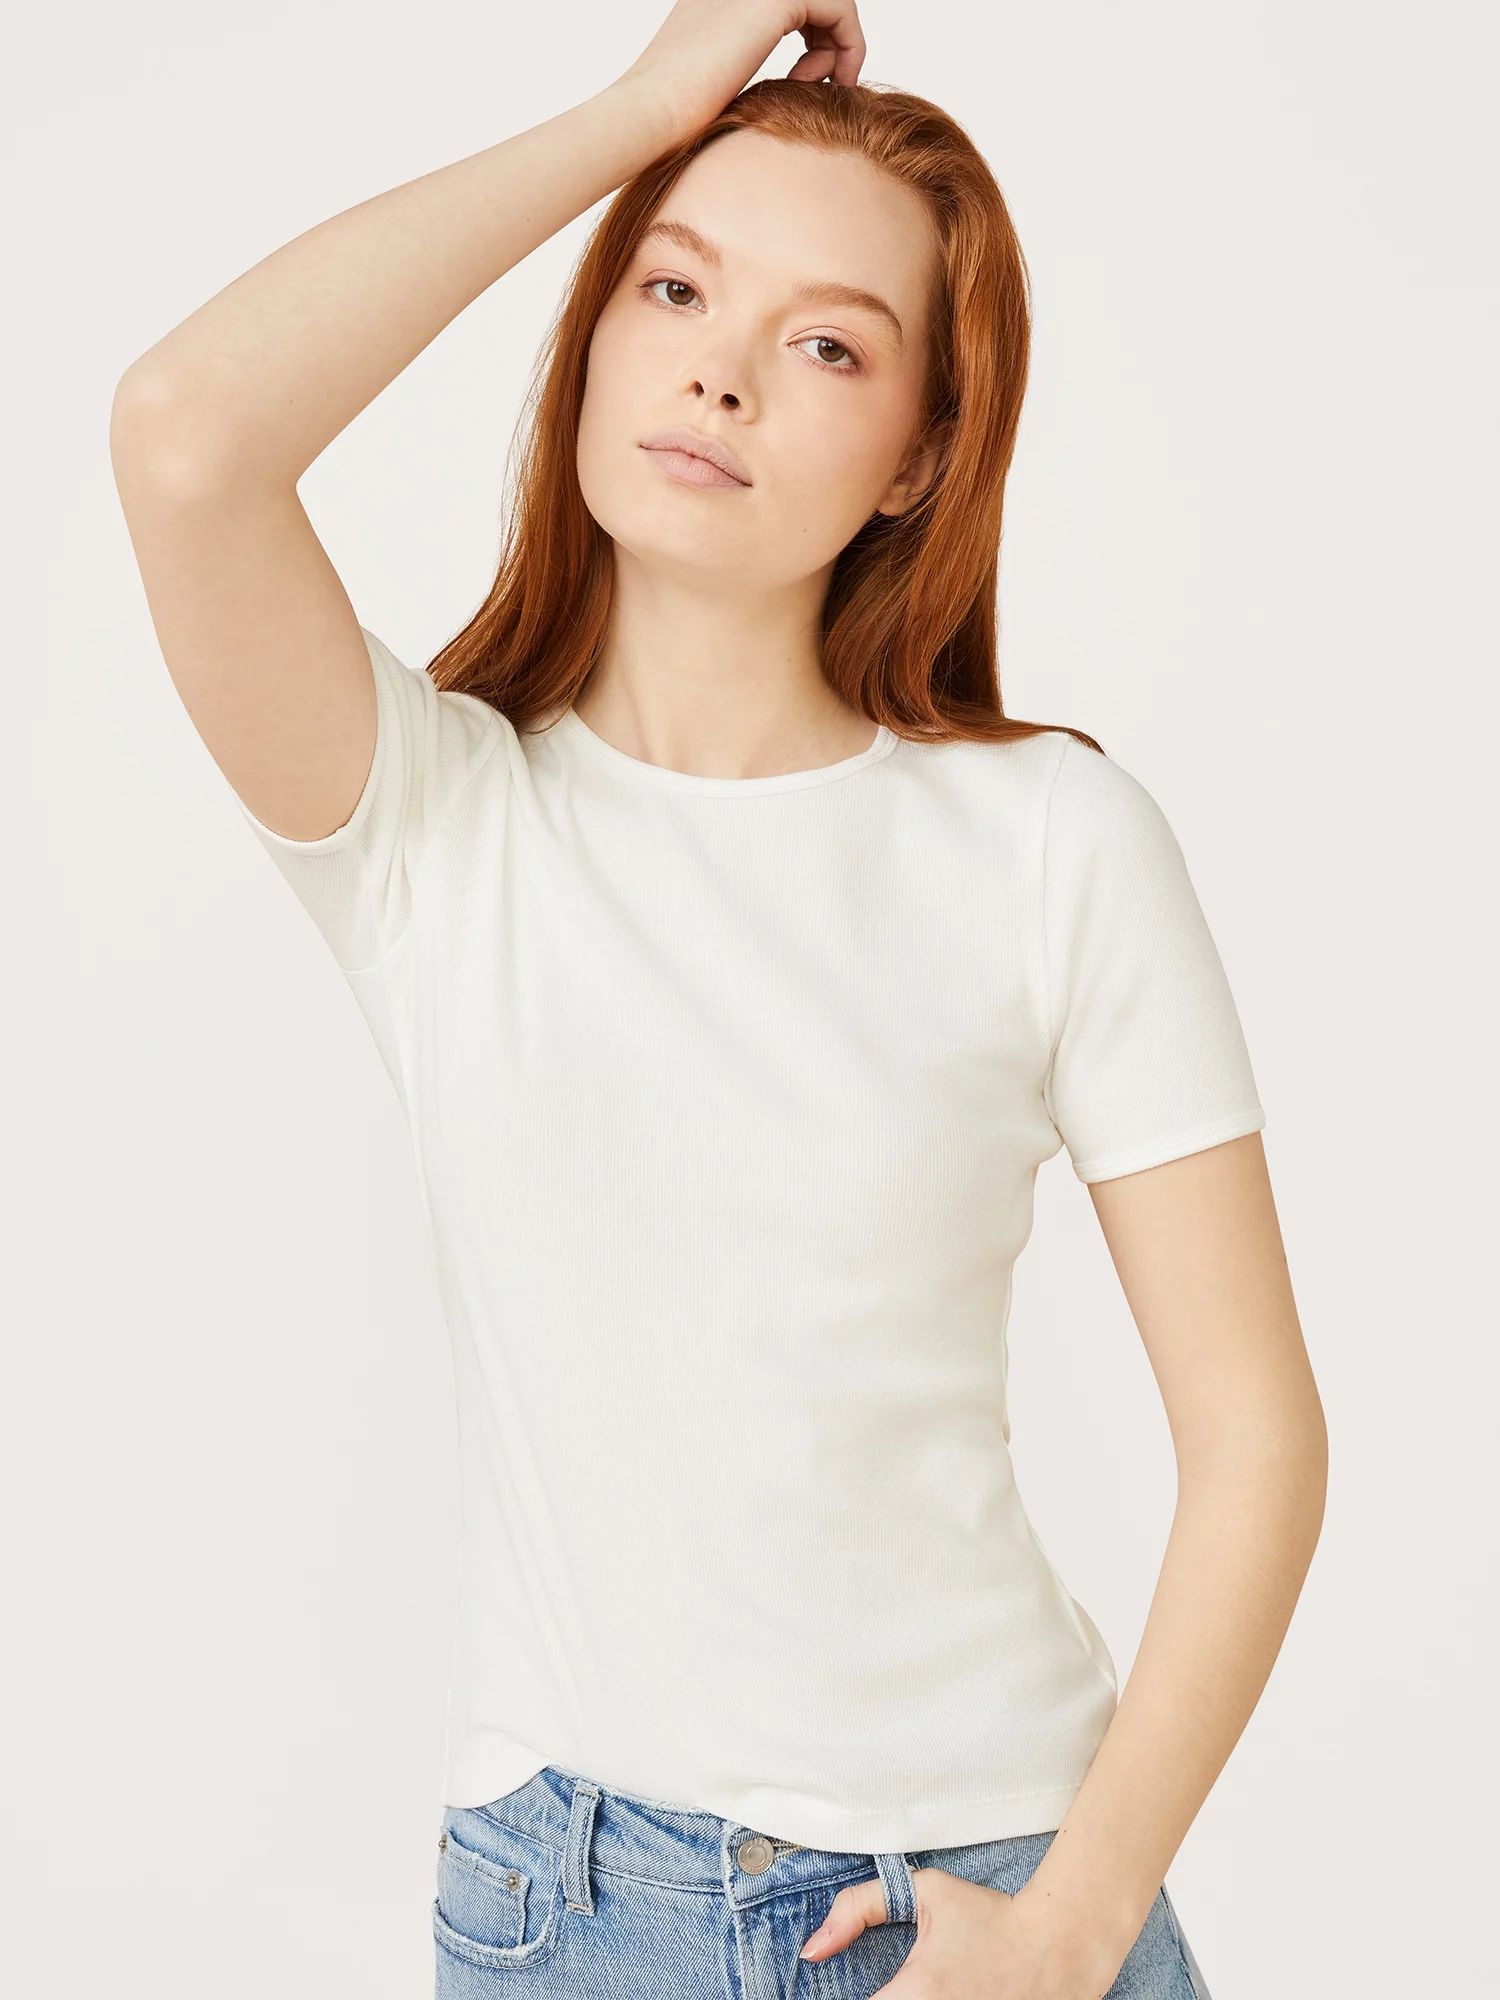 Free Assembly Women's Ribbed Crewneck Tee with Short Sleeves, Sizes XS-XXXL | Walmart (US)